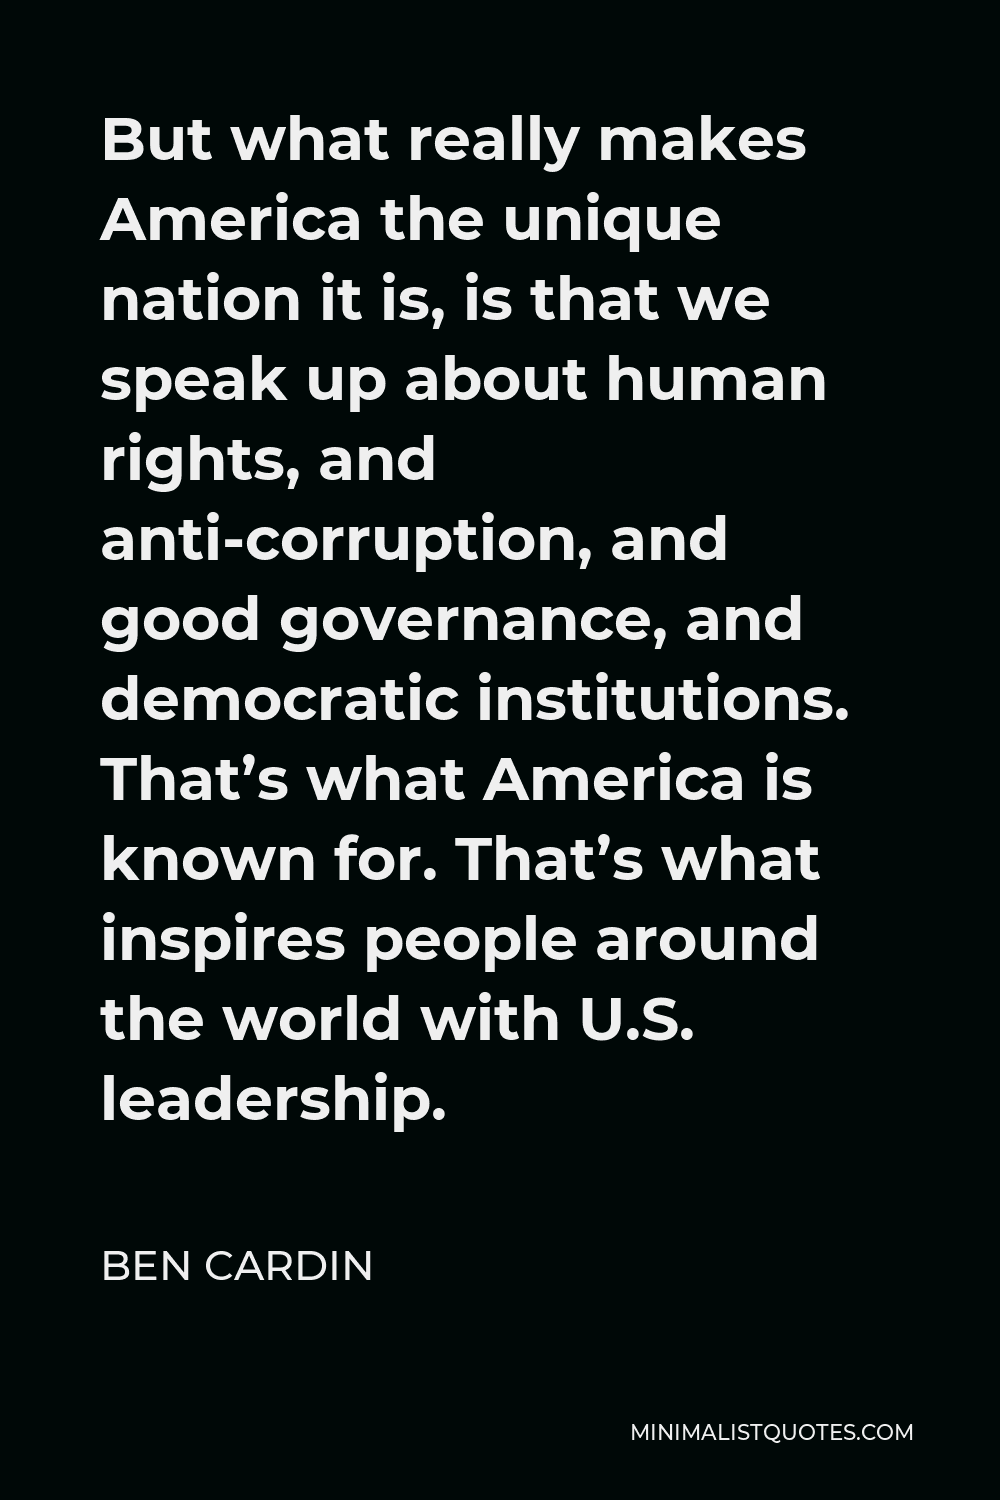 Ben Cardin Quote - But what really makes America the unique nation it is, is that we speak up about human rights, and anti-corruption, and good governance, and democratic institutions. That’s what America is known for. That’s what inspires people around the world with U.S. leadership.